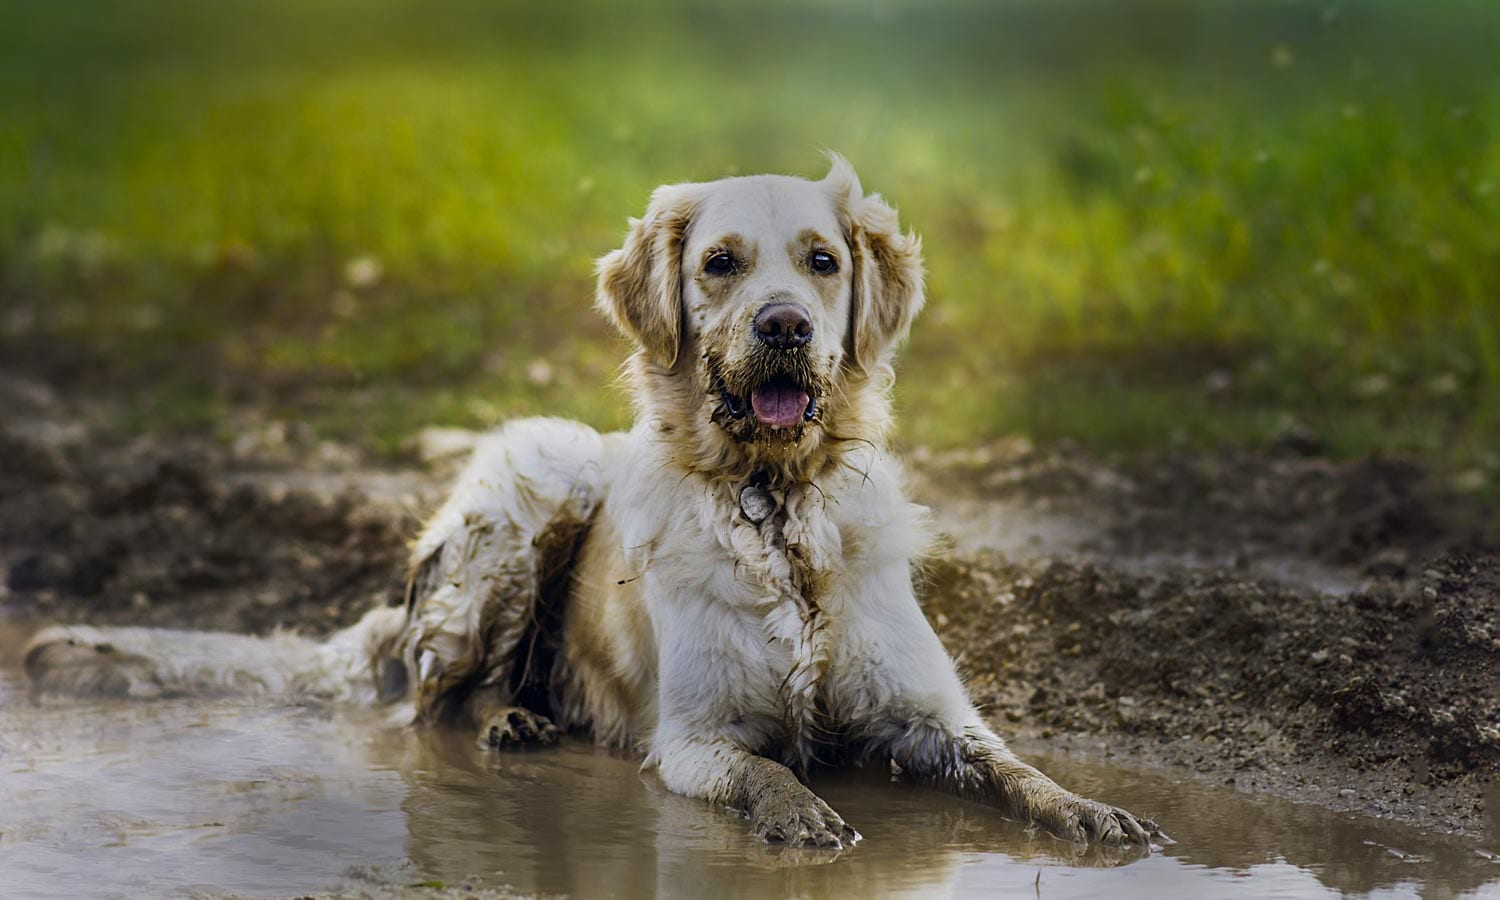 I’ll Be Gobsmacked If You Can Score at Least 15/20 on This Tricky Synonyms and Antonyms Quiz Dirty Muddy Dog